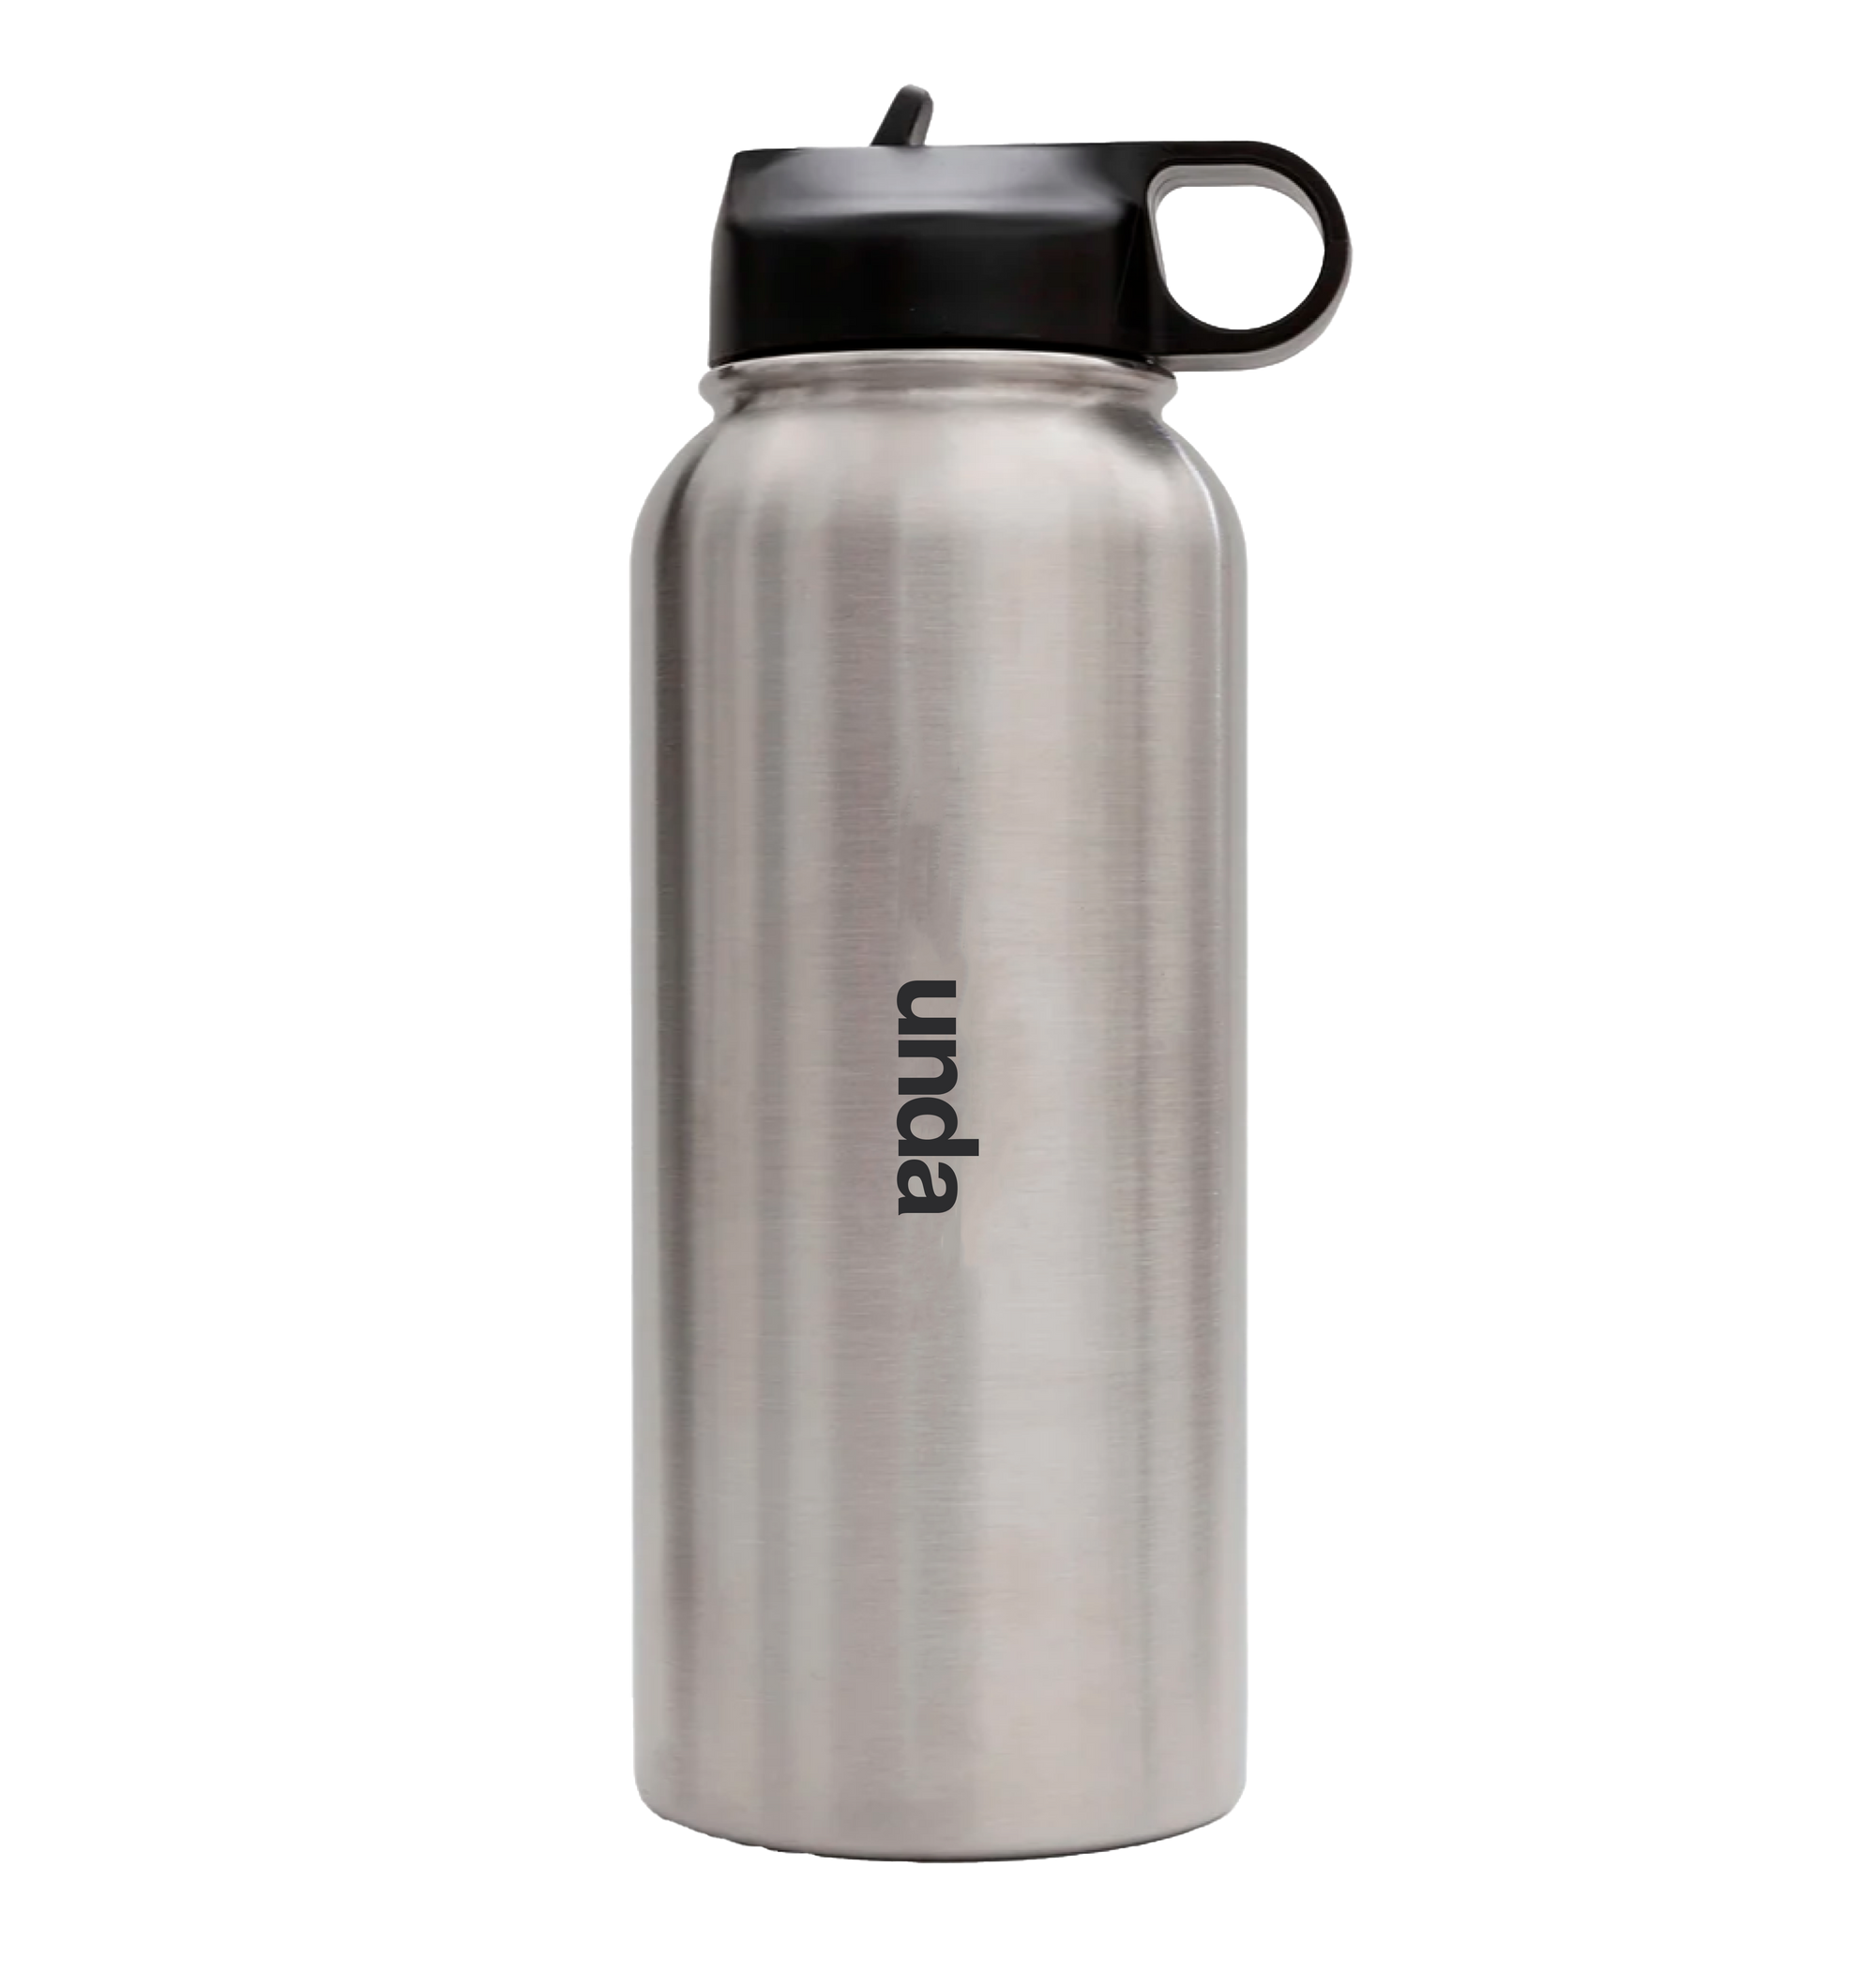 Stainless Steel - 910 ml